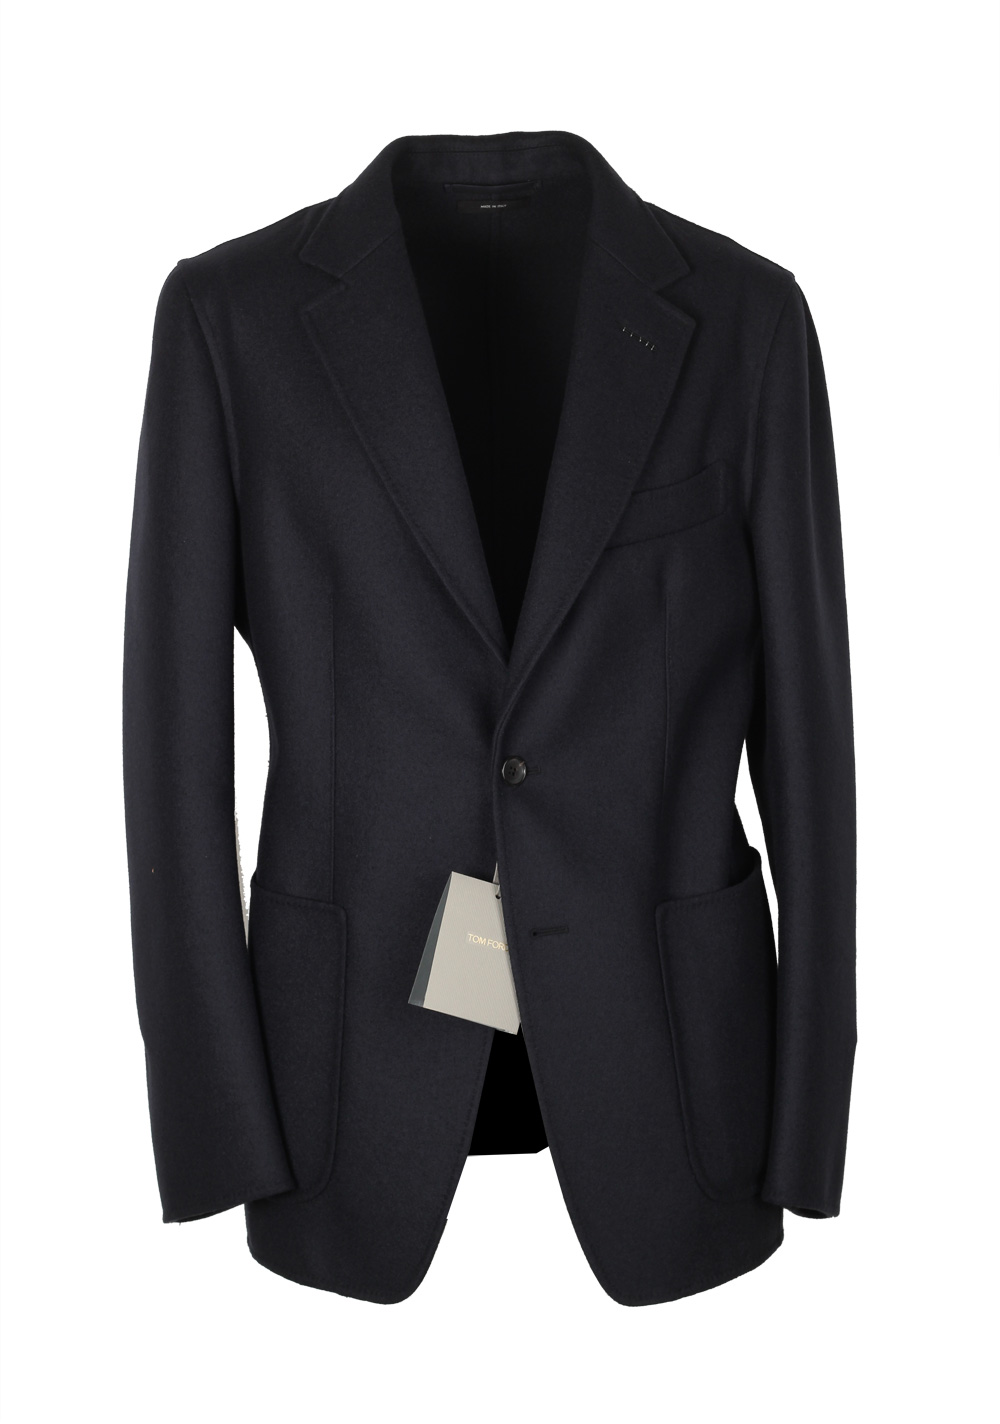 TOM FORD O’Connor Black Double Faced Unlined Sport Coat Size 48 / 38R U ...